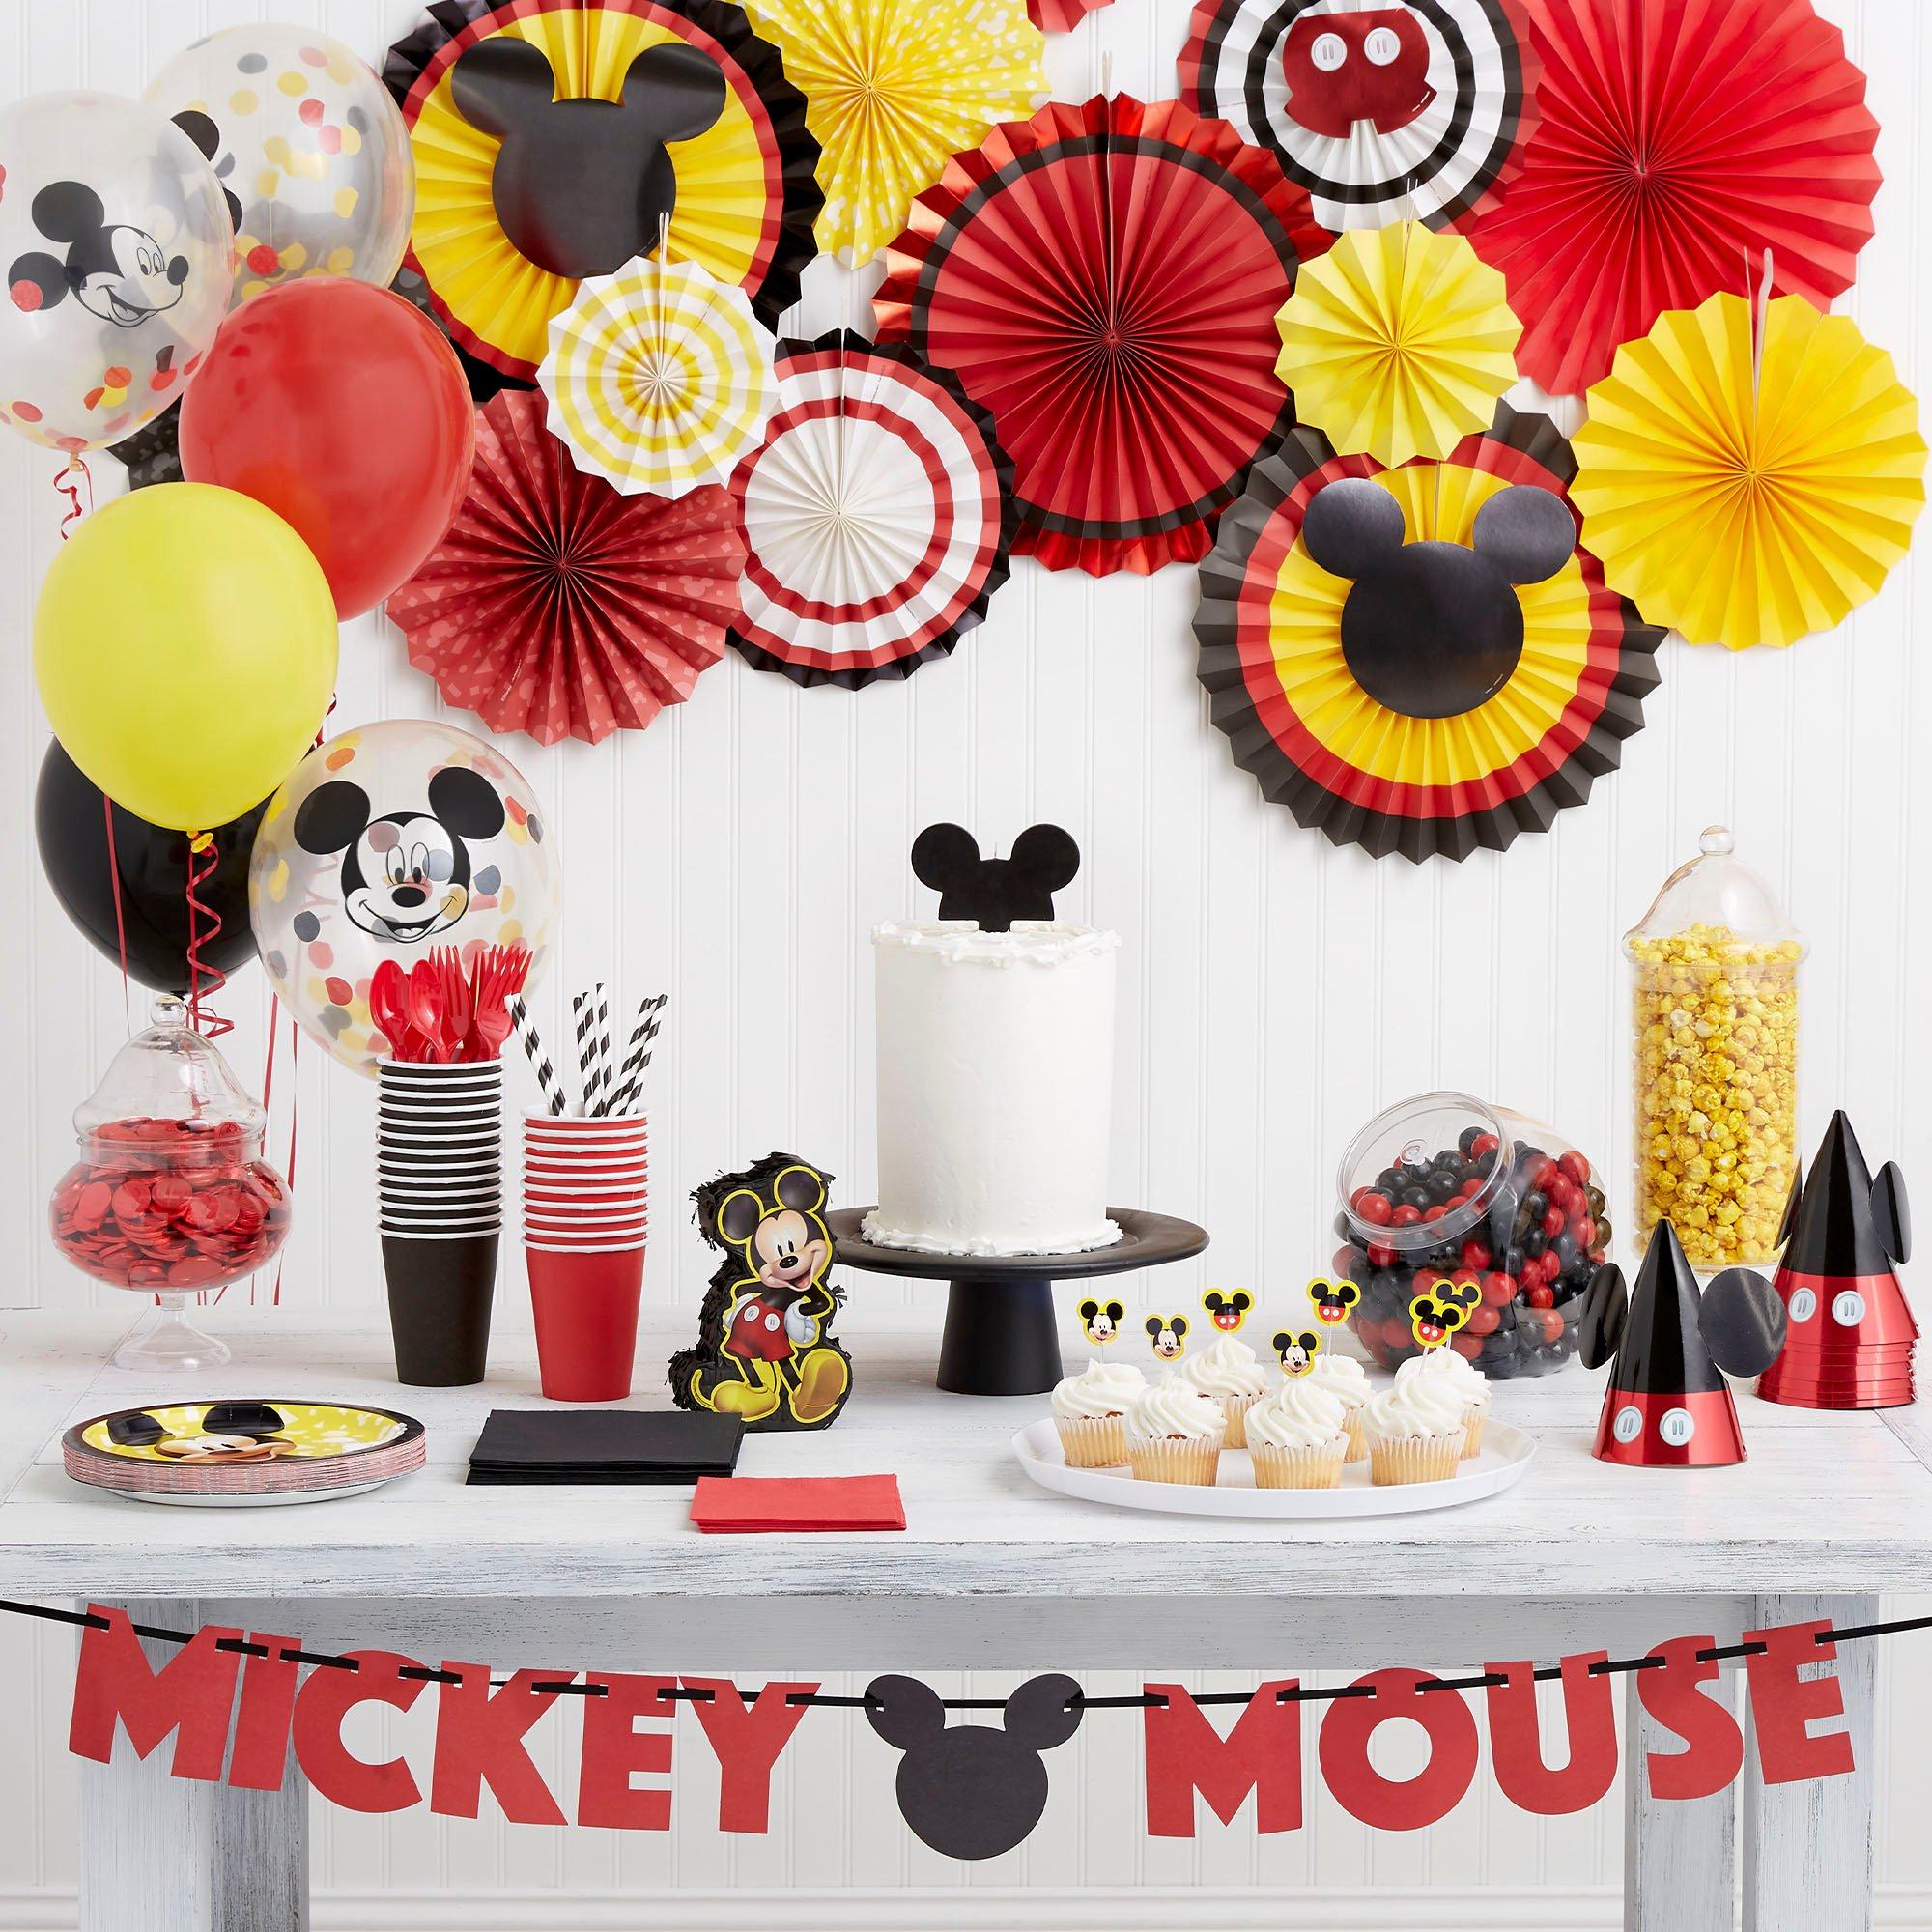 Mickey Mouse Birthday Party Supplies,Mickey Mouse Party Supplies,Mickey  Mouse Birthday Decorations Kit,for Mickey Theme Party Baby Birthday Party  Mickey Mouse Theme Party Supplies (Red)